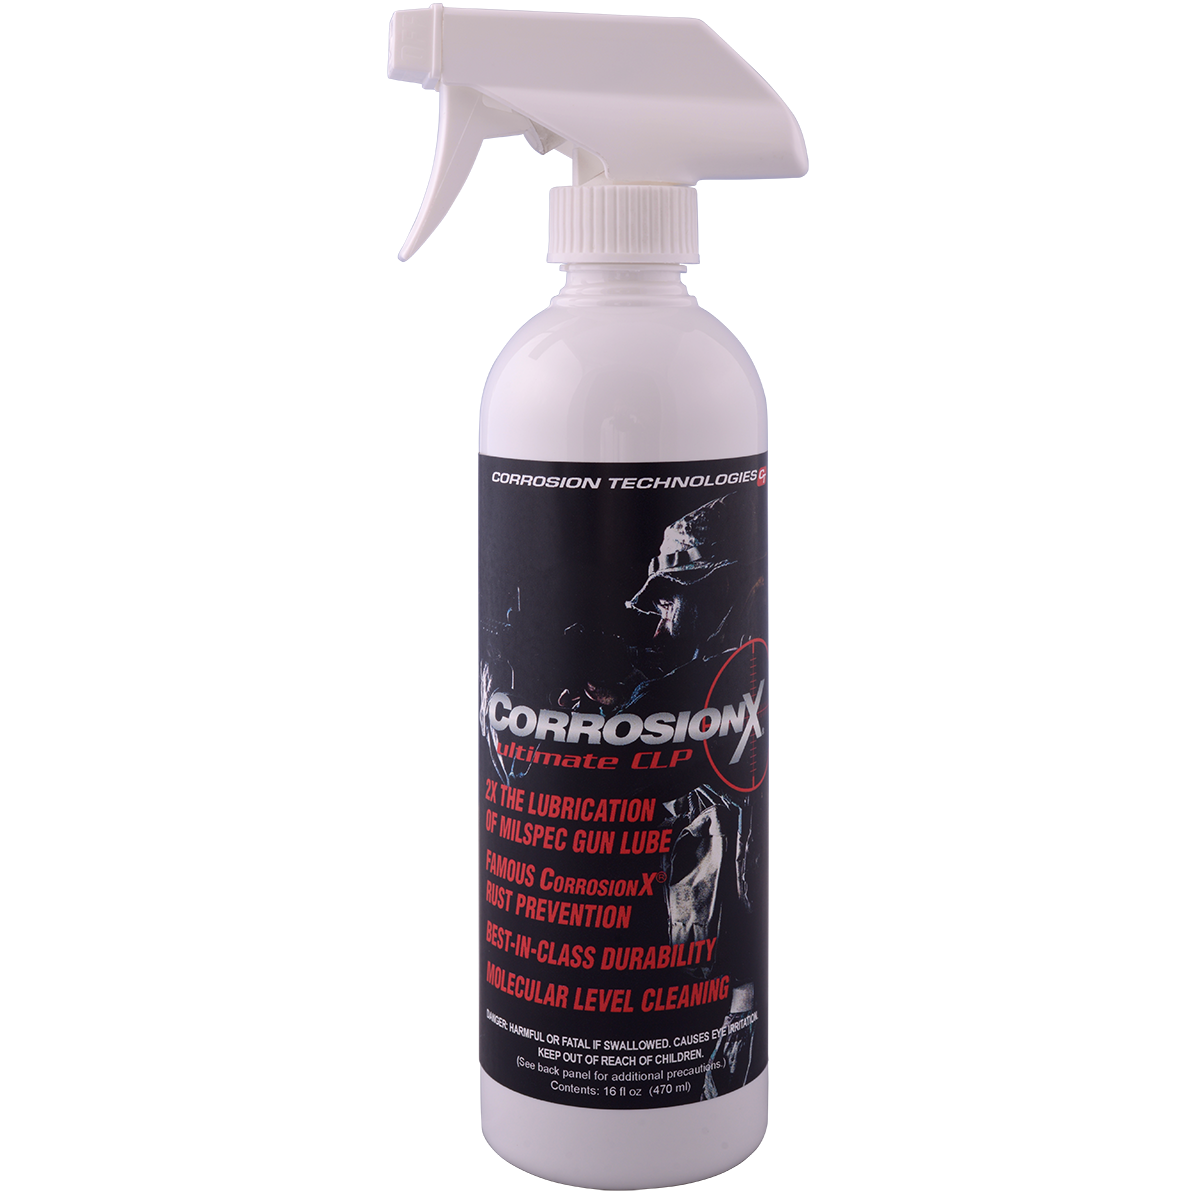 Breakthrough Clean Military-Grade Gun Cleaning Solvent - Various Size  Options - Gun Cleaner Spray Bottle - Gun Bore Cleaner and Degreaser -  Automotive Oil and Grease Remover 6-Ounce